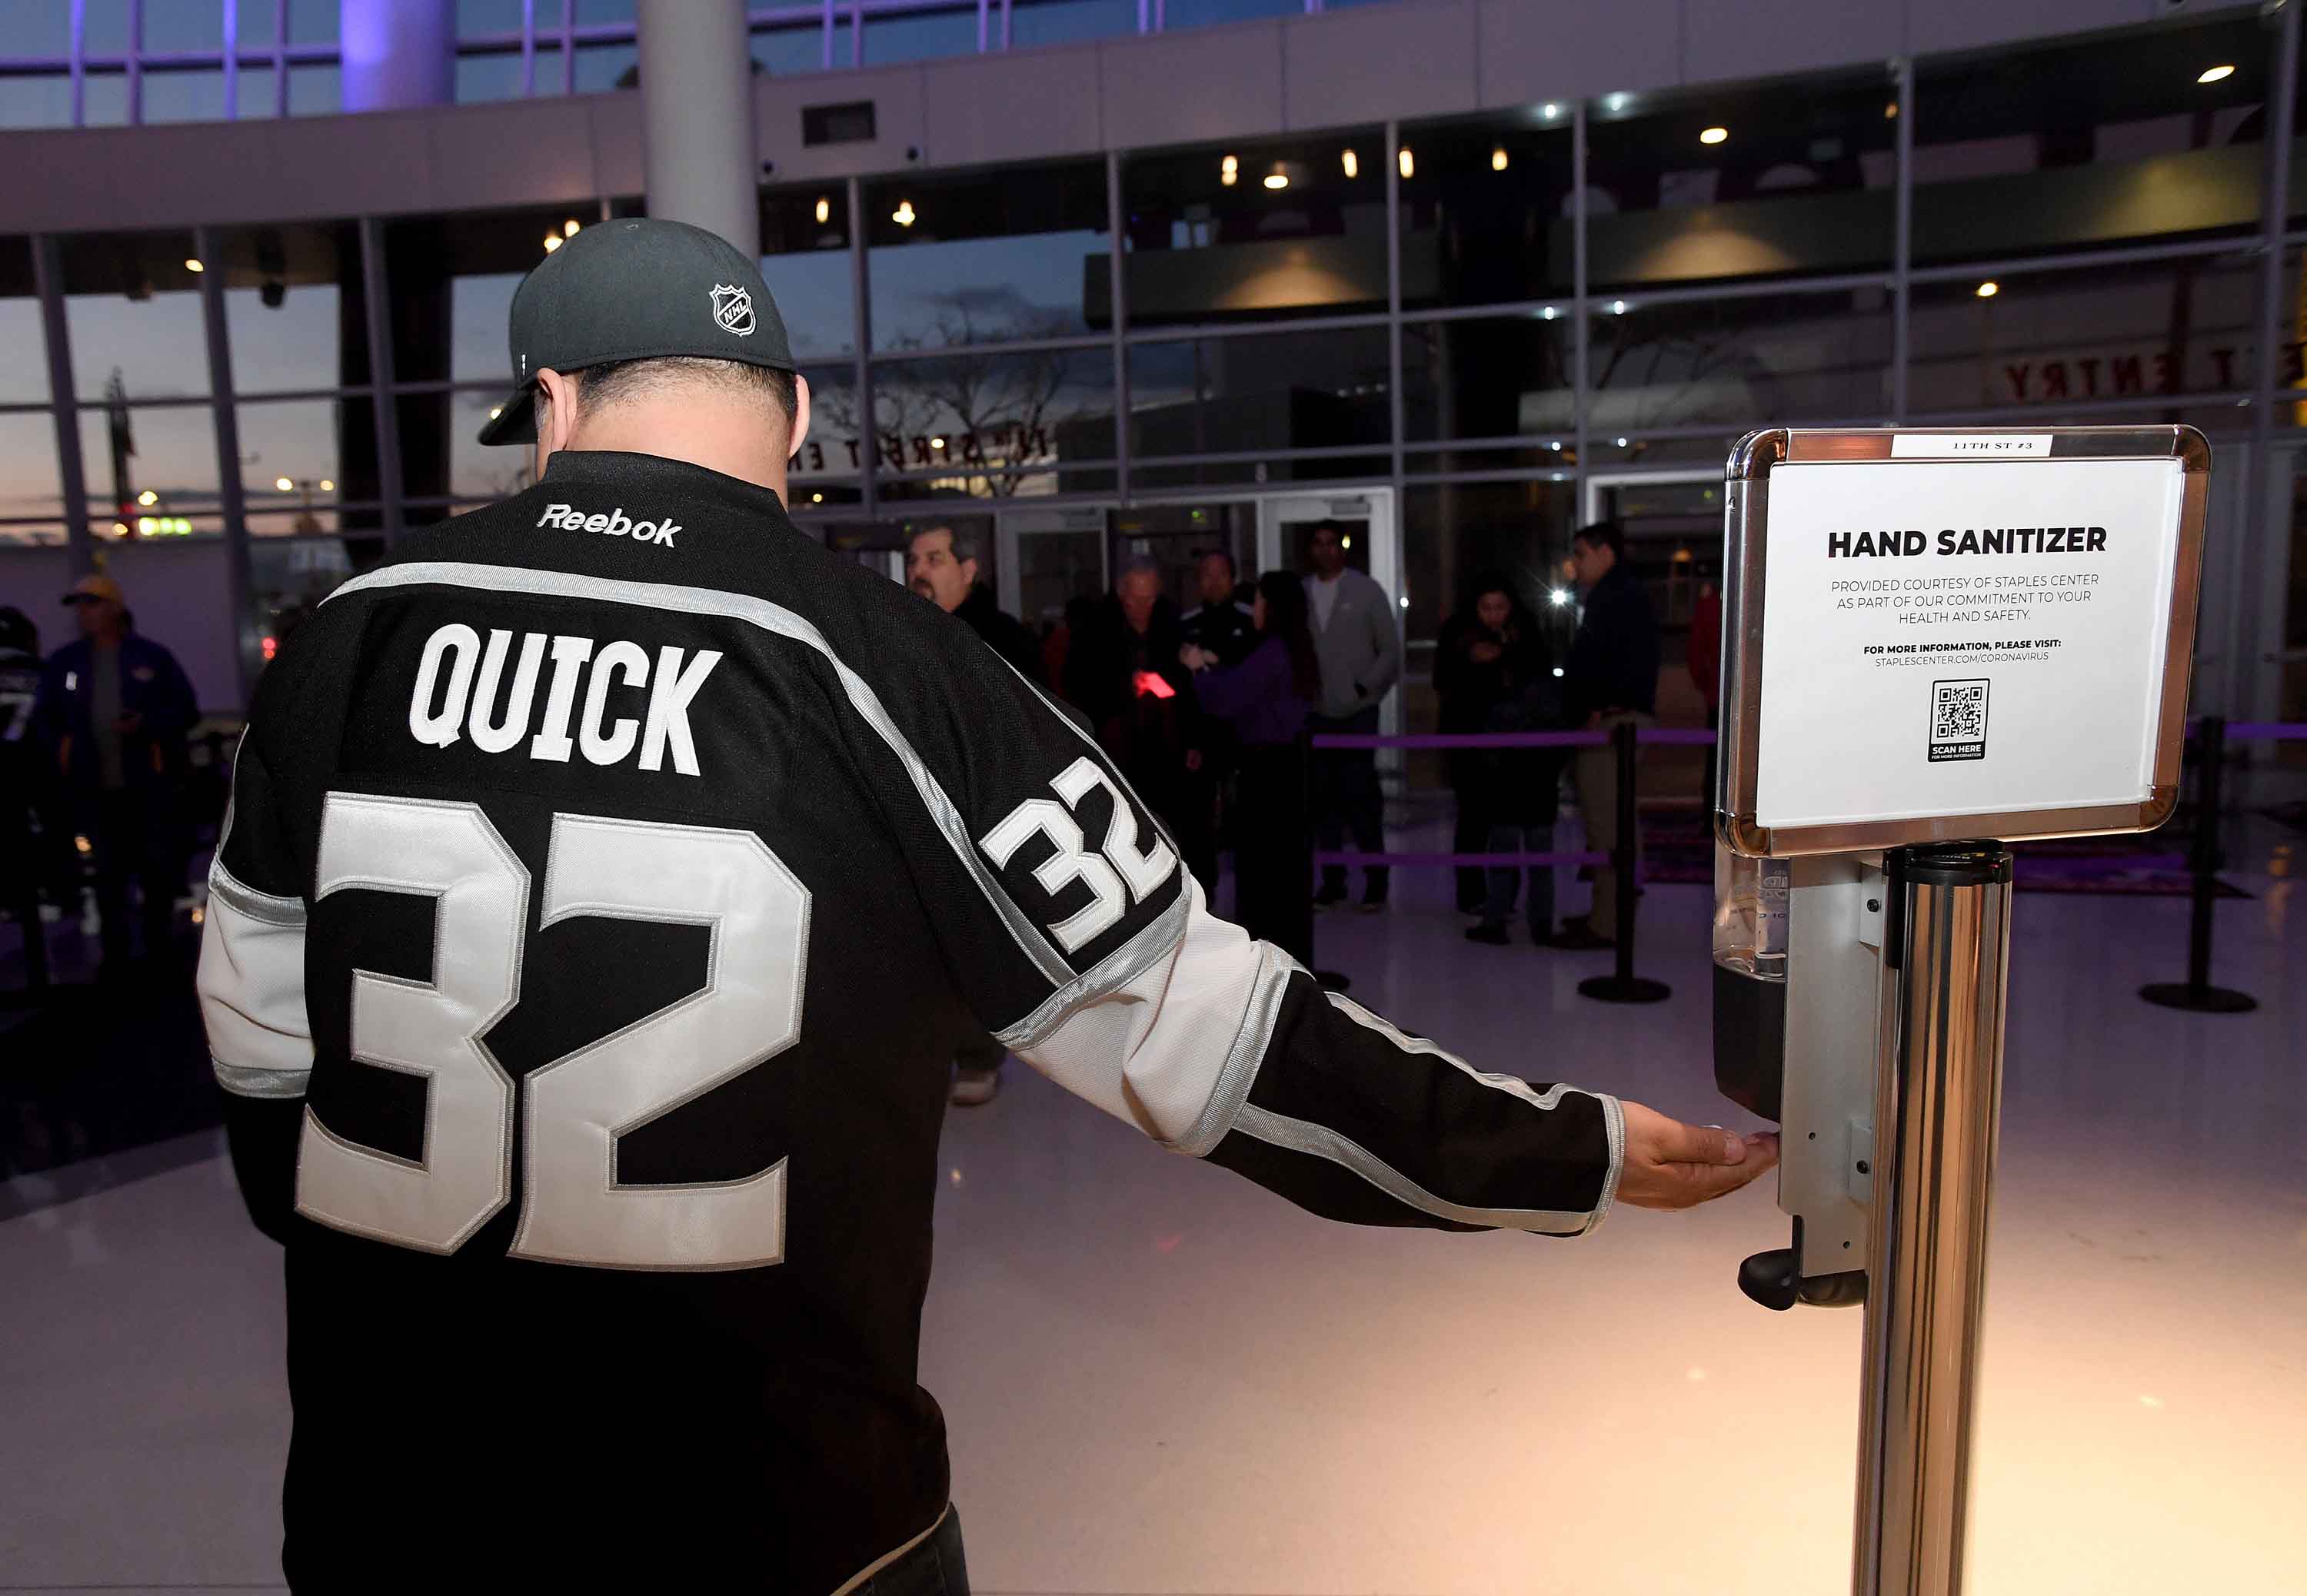 A Los Angeles Kings fan reaches for hand sanitizer before a game against the Ottawa Senators at Staples Center in Los Angeles, California, on March 11.